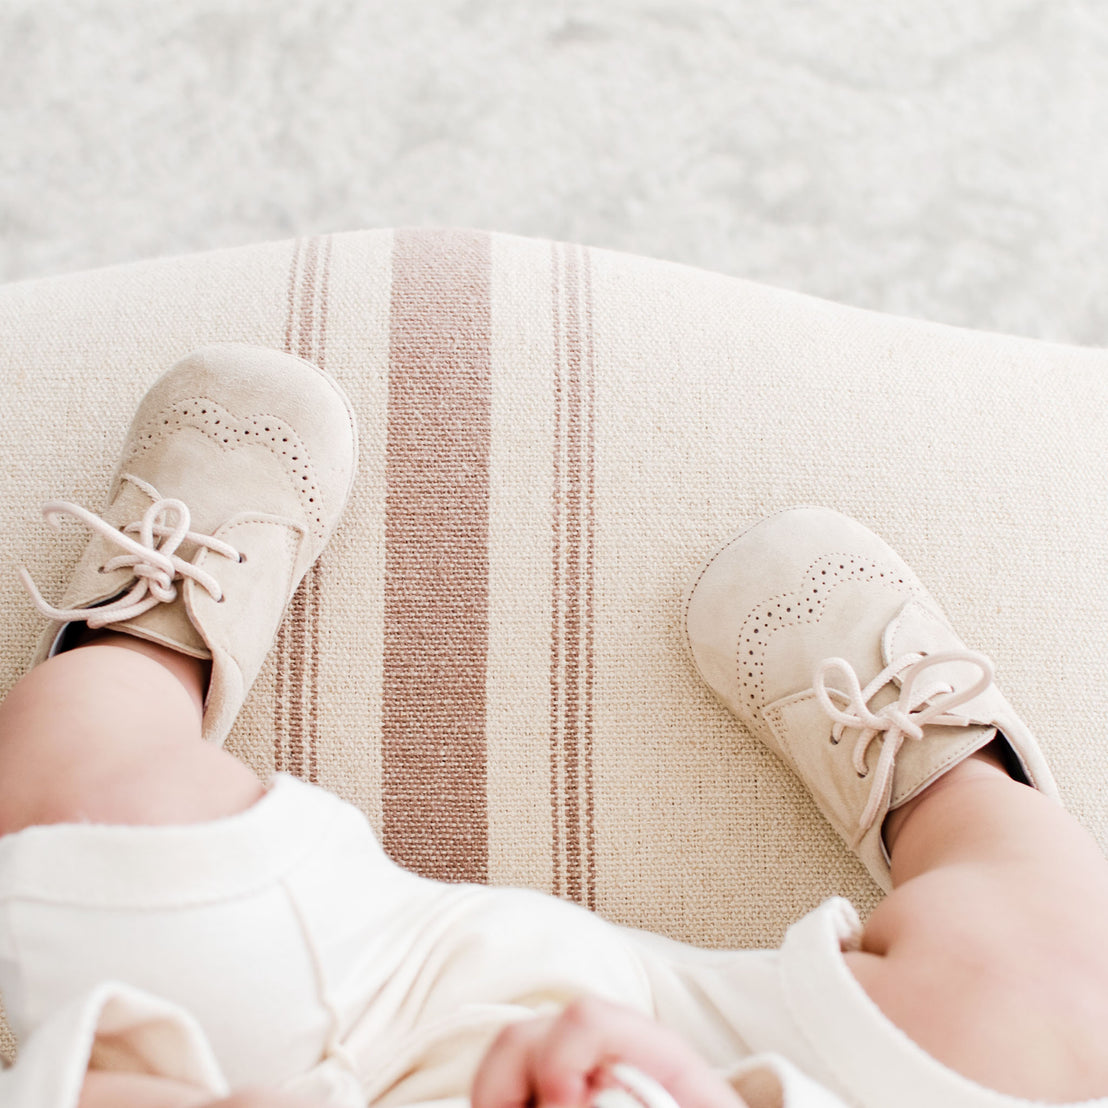 Photo of a baby wearing the Tan Suede Shoes on a chair. They are made with tan suede leather and feature detailed edging